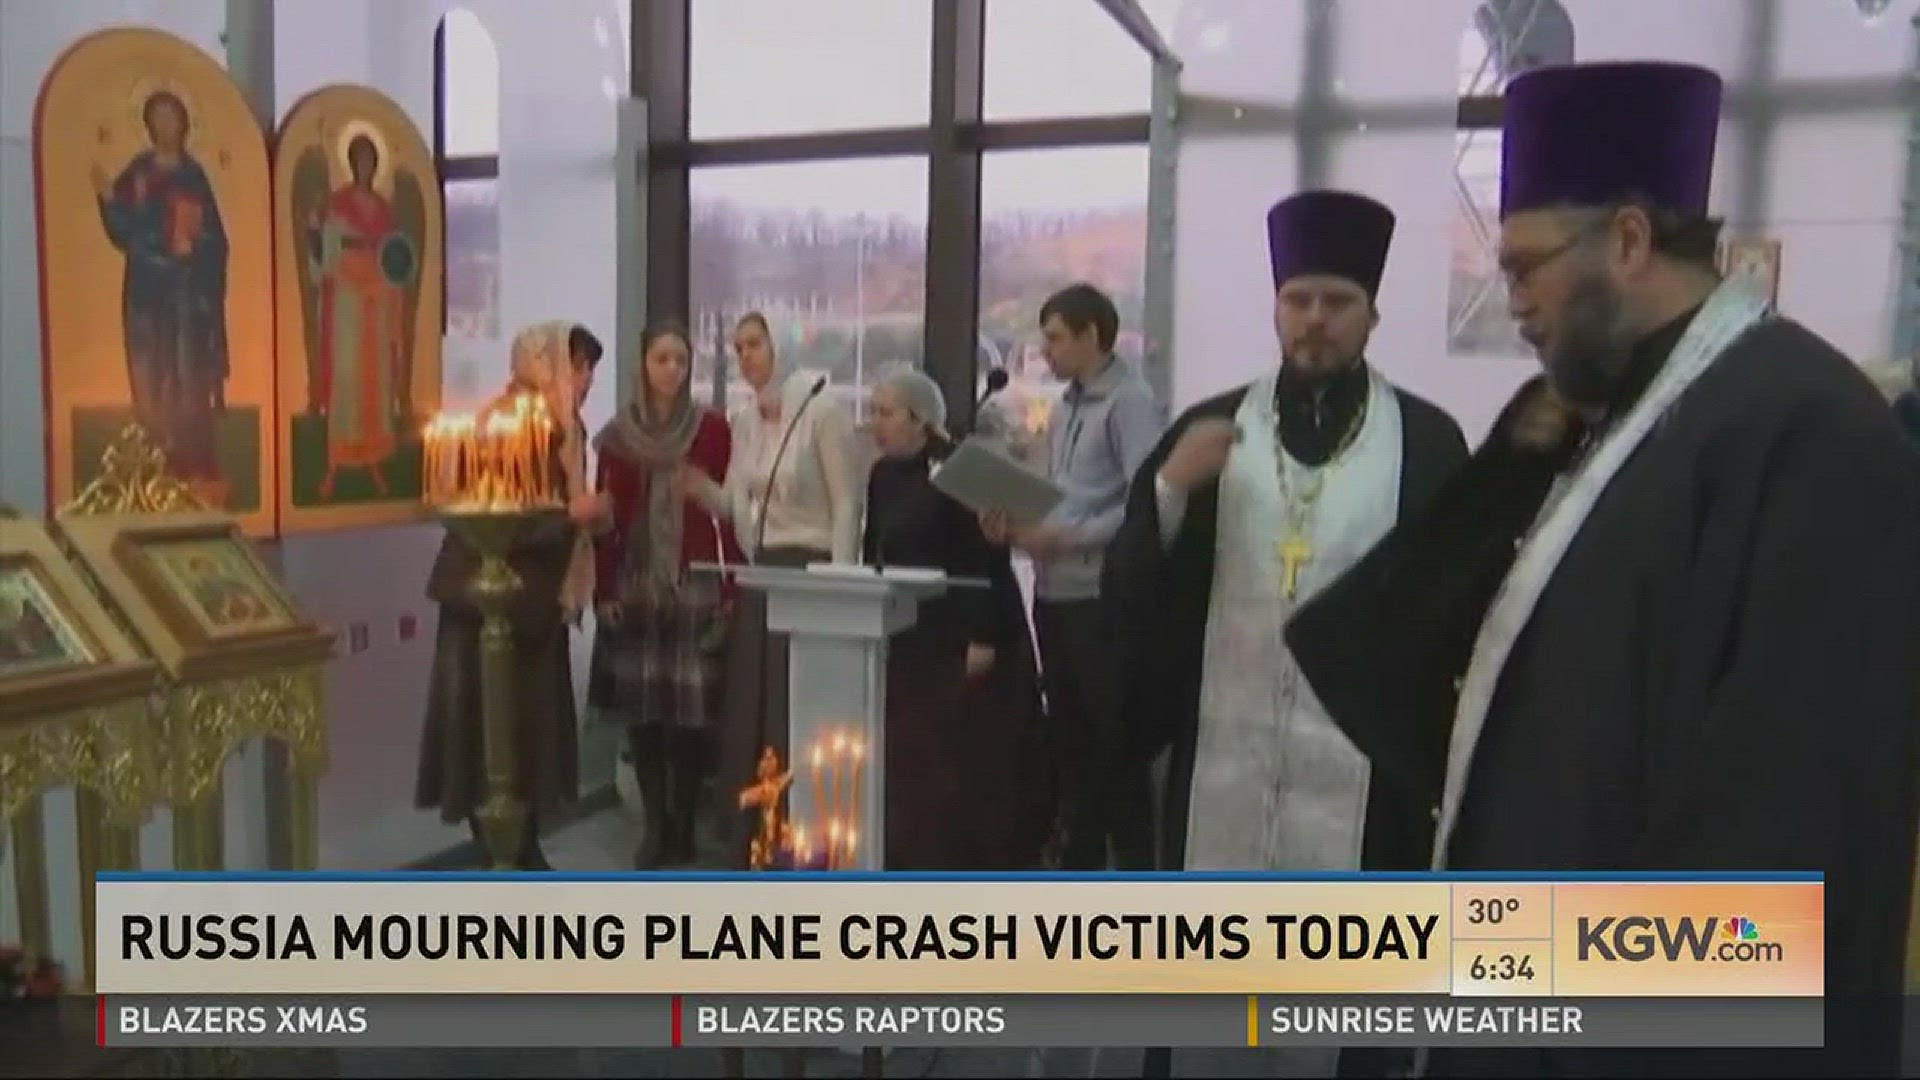 Russia mourning plane crash victims